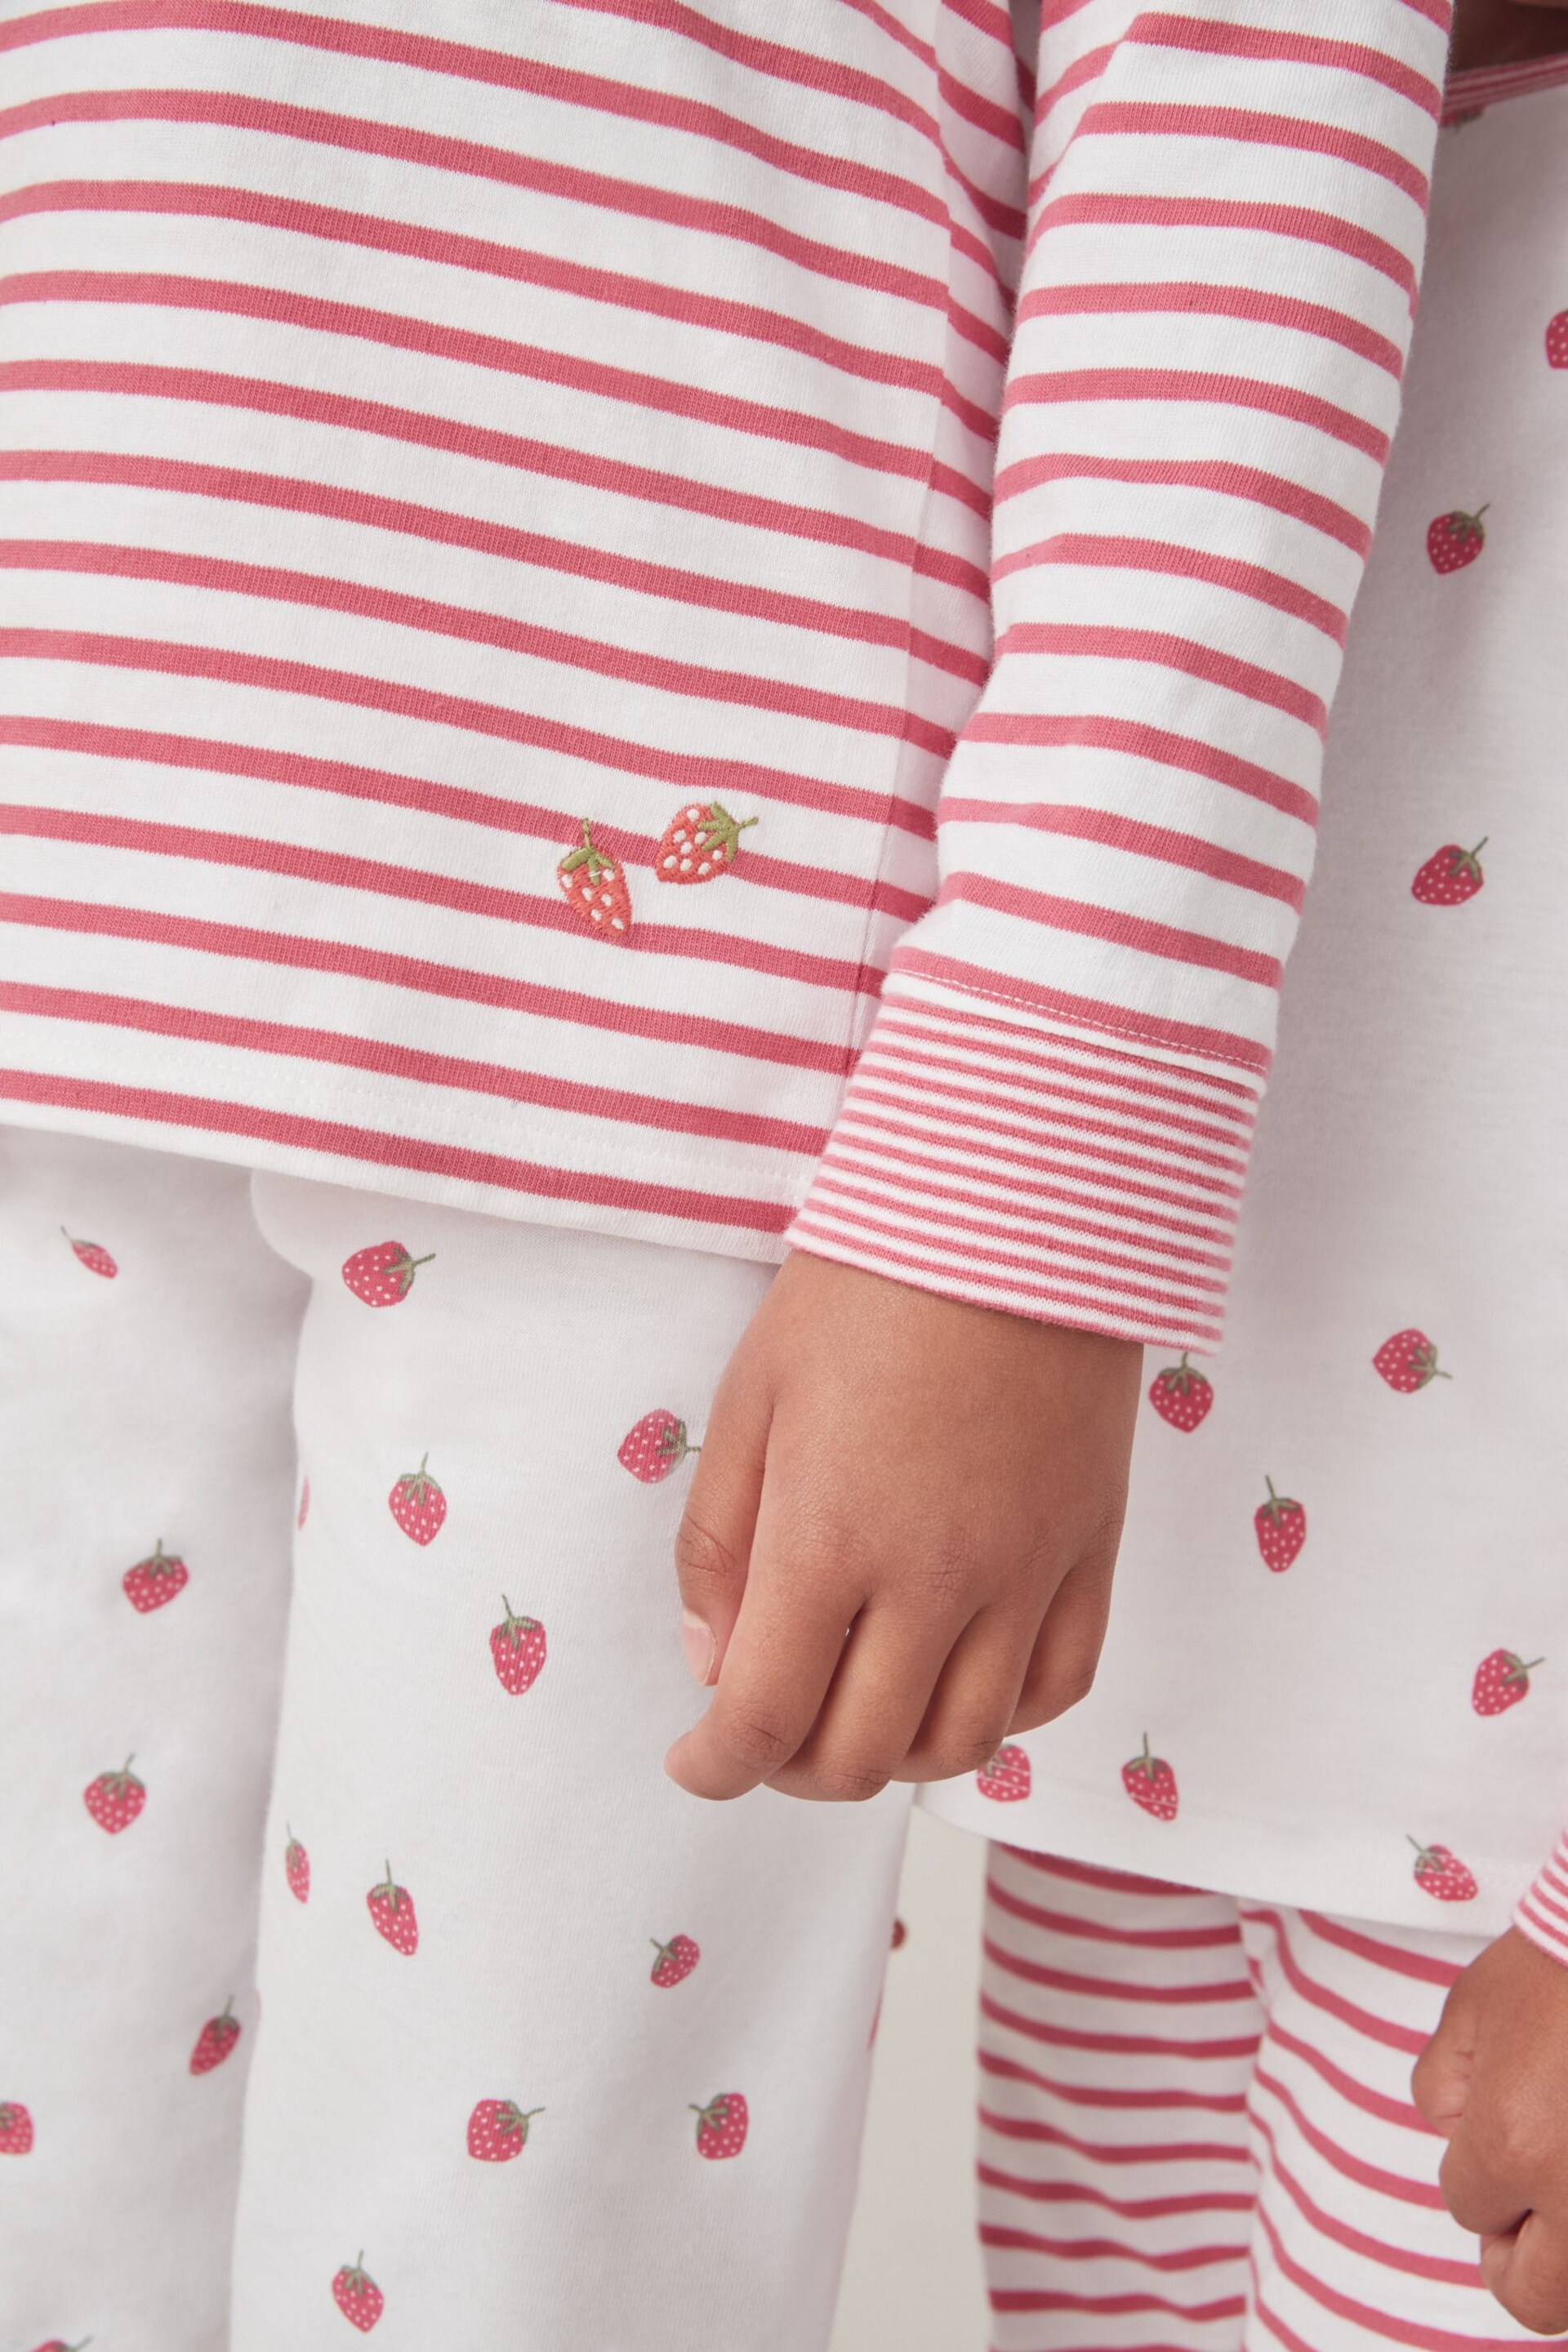 The White Company Cotton Strawberry And Stripe White Pyjamas 2 Pack - Image 4 of 6